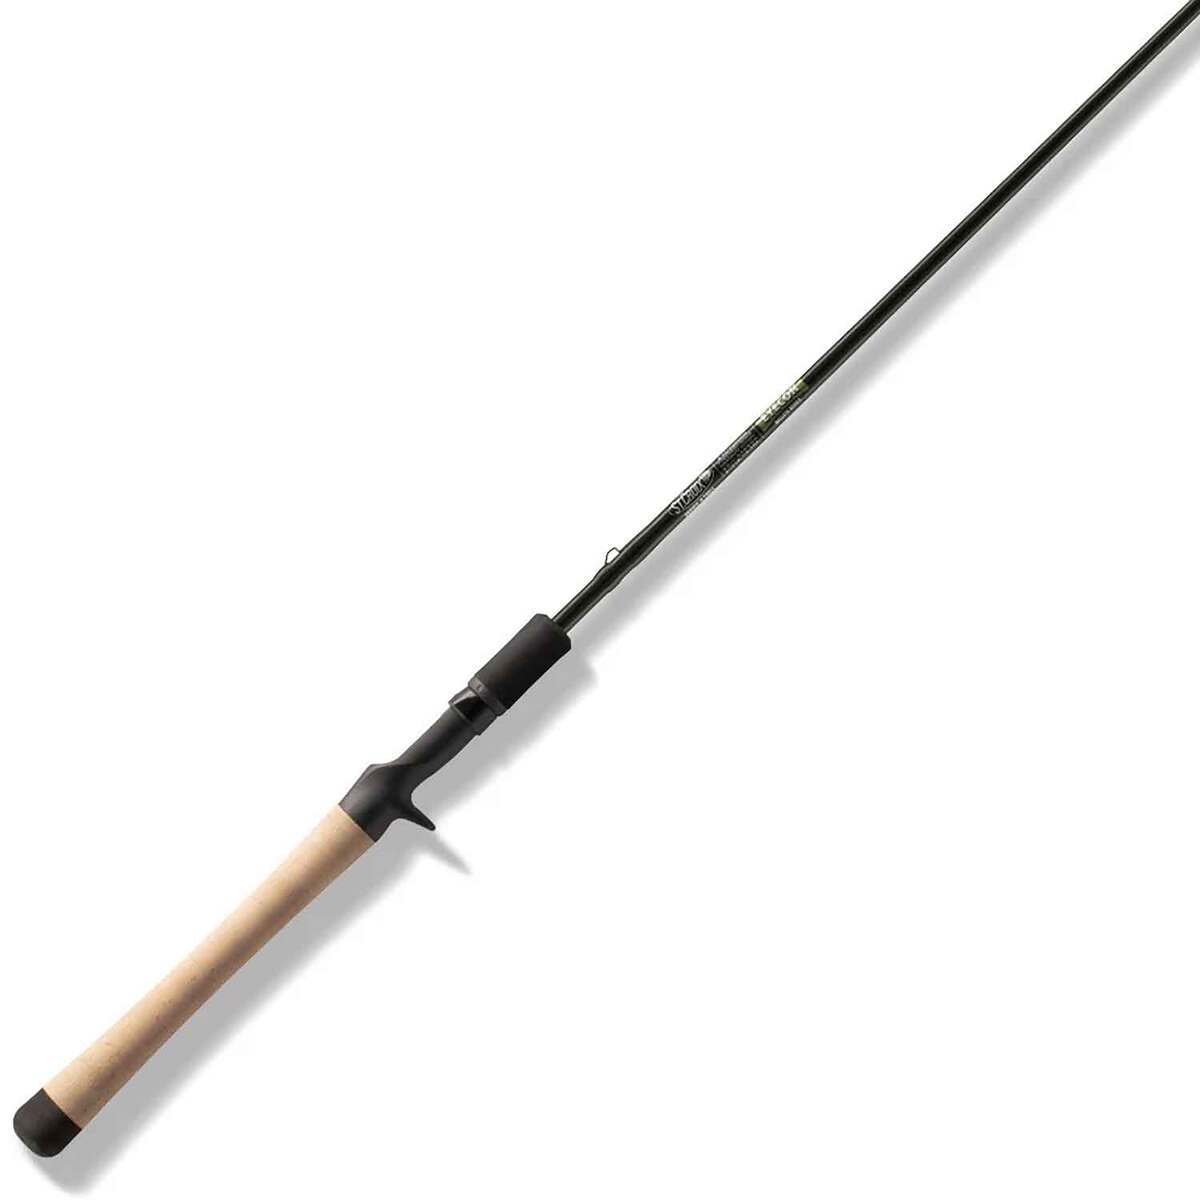 St. Croix Eyecon Casting Rod - 7ft, Medium Heavy Power, Moderate Action ...